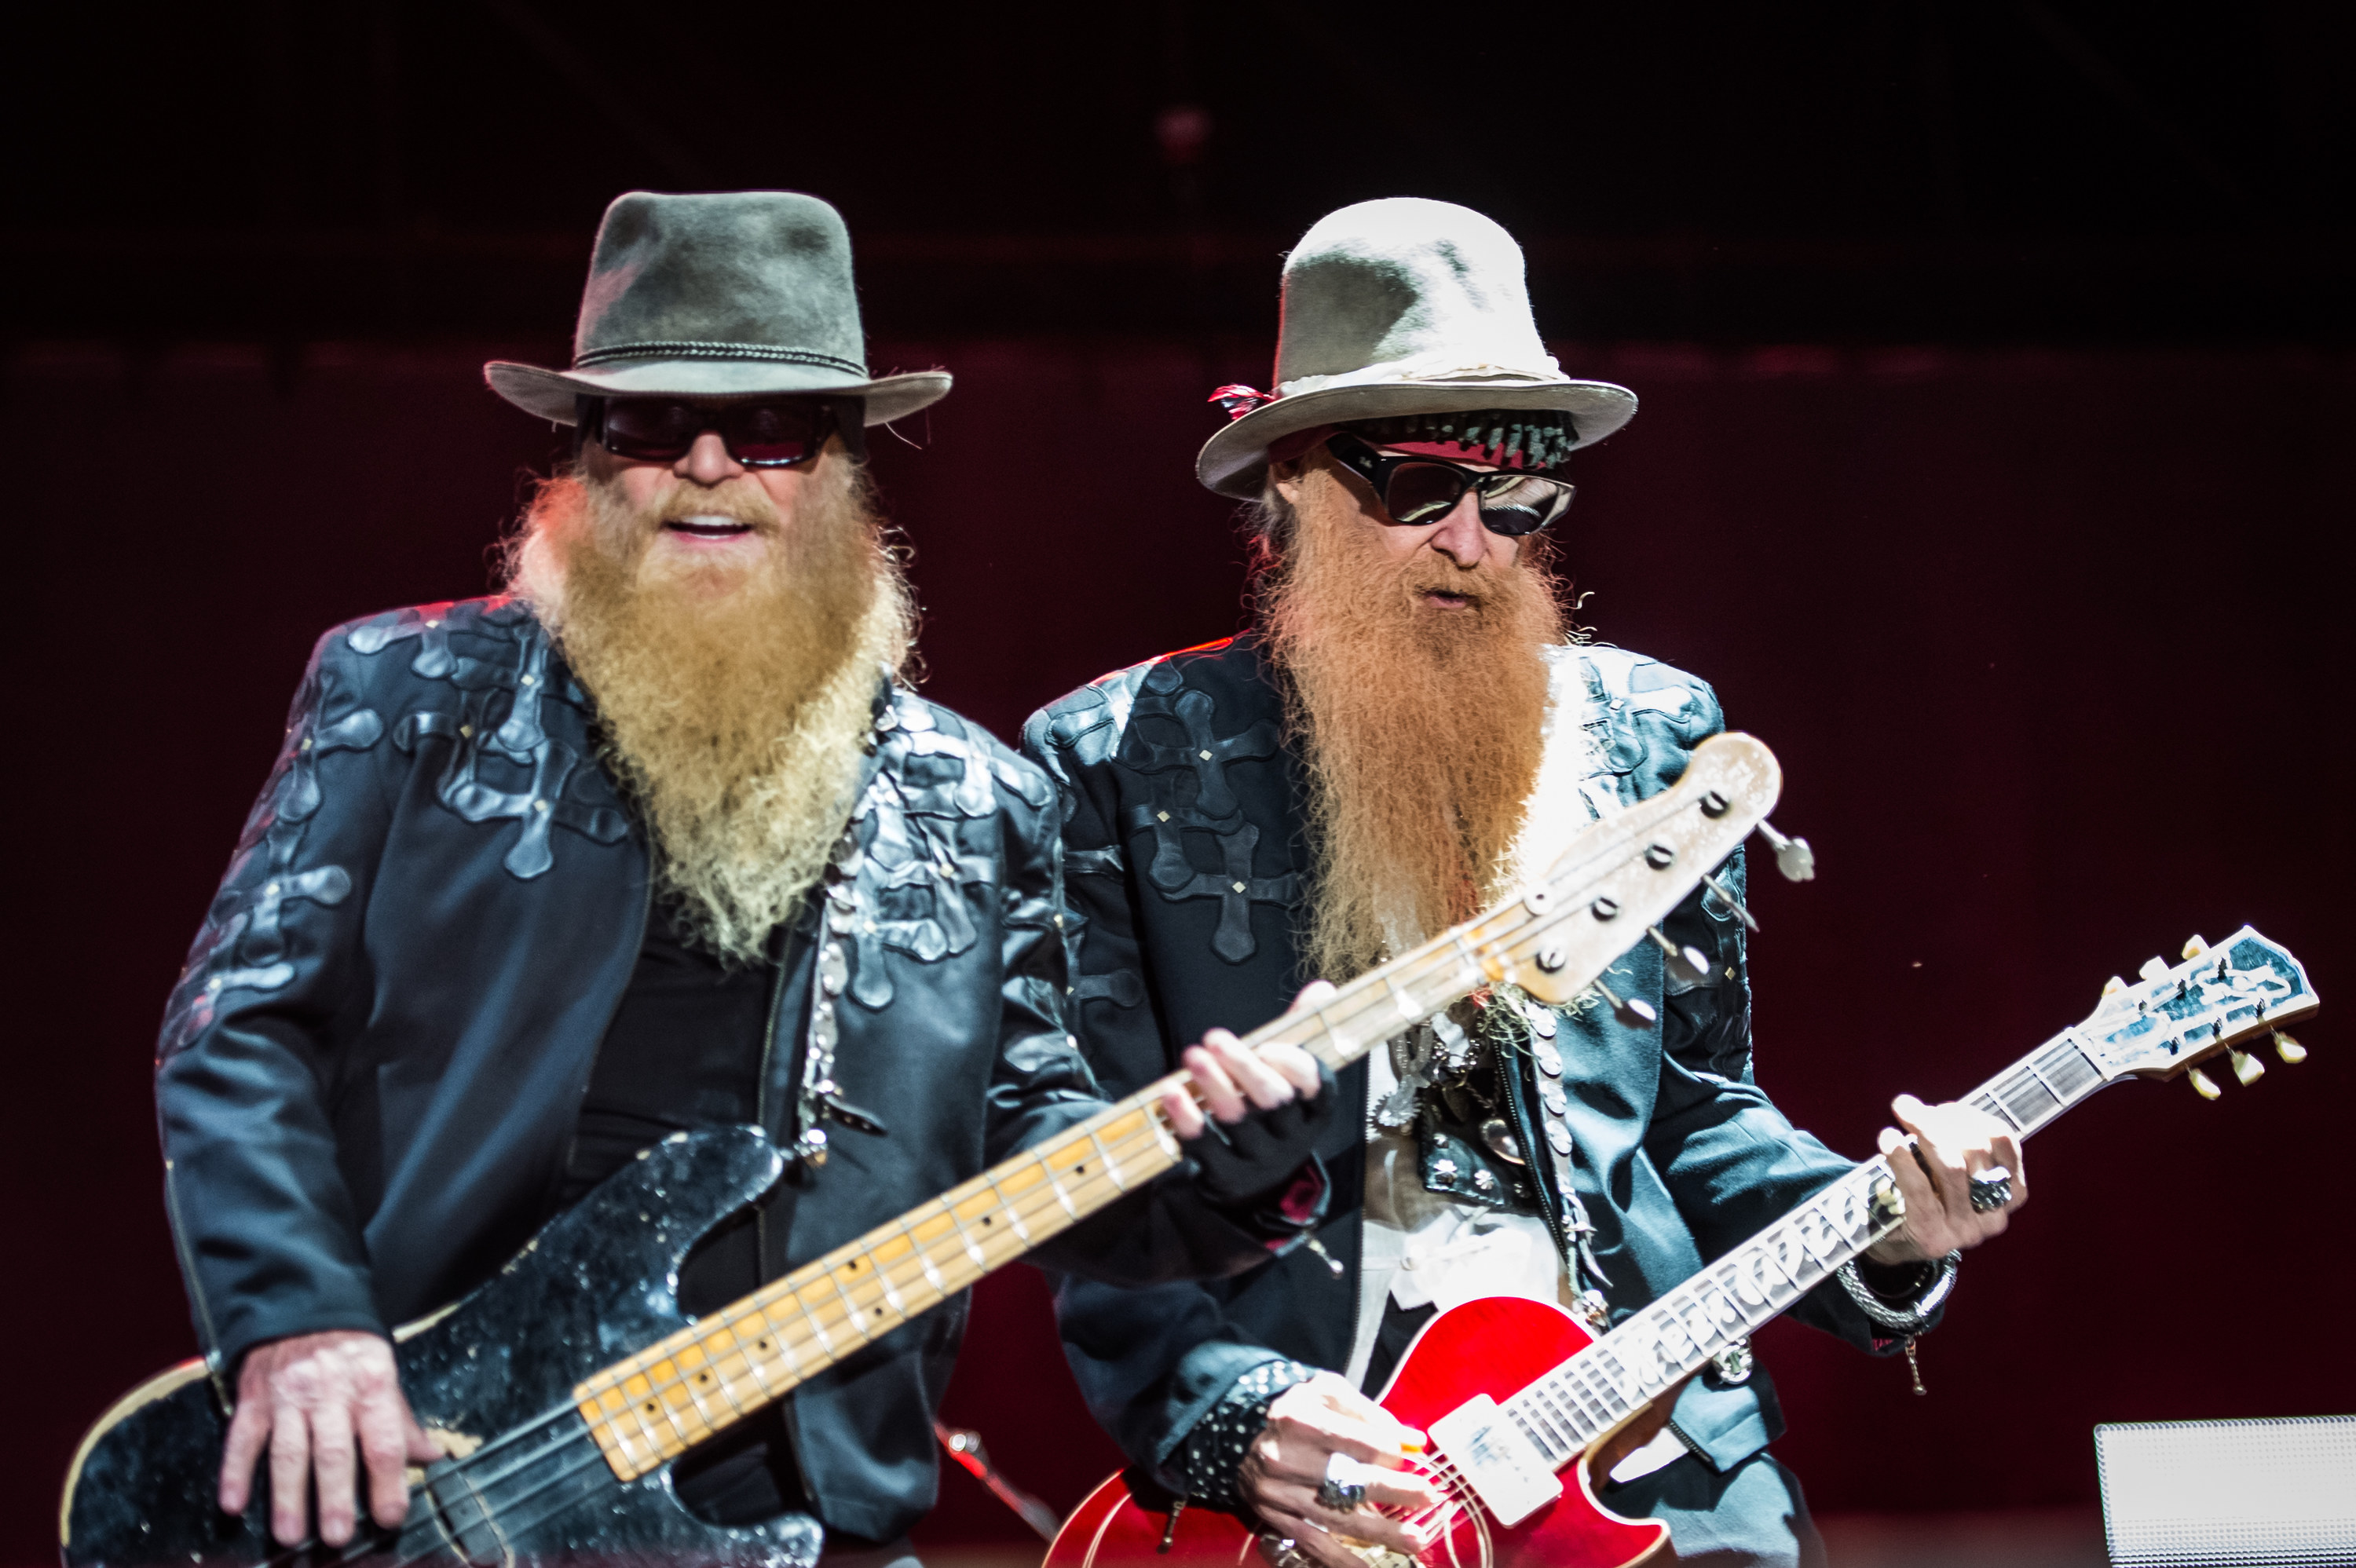 ZZ Top members Dusty Hill and Billy Gibbons are pictured as they perform live at Alfa Romeo City Sound in 2014